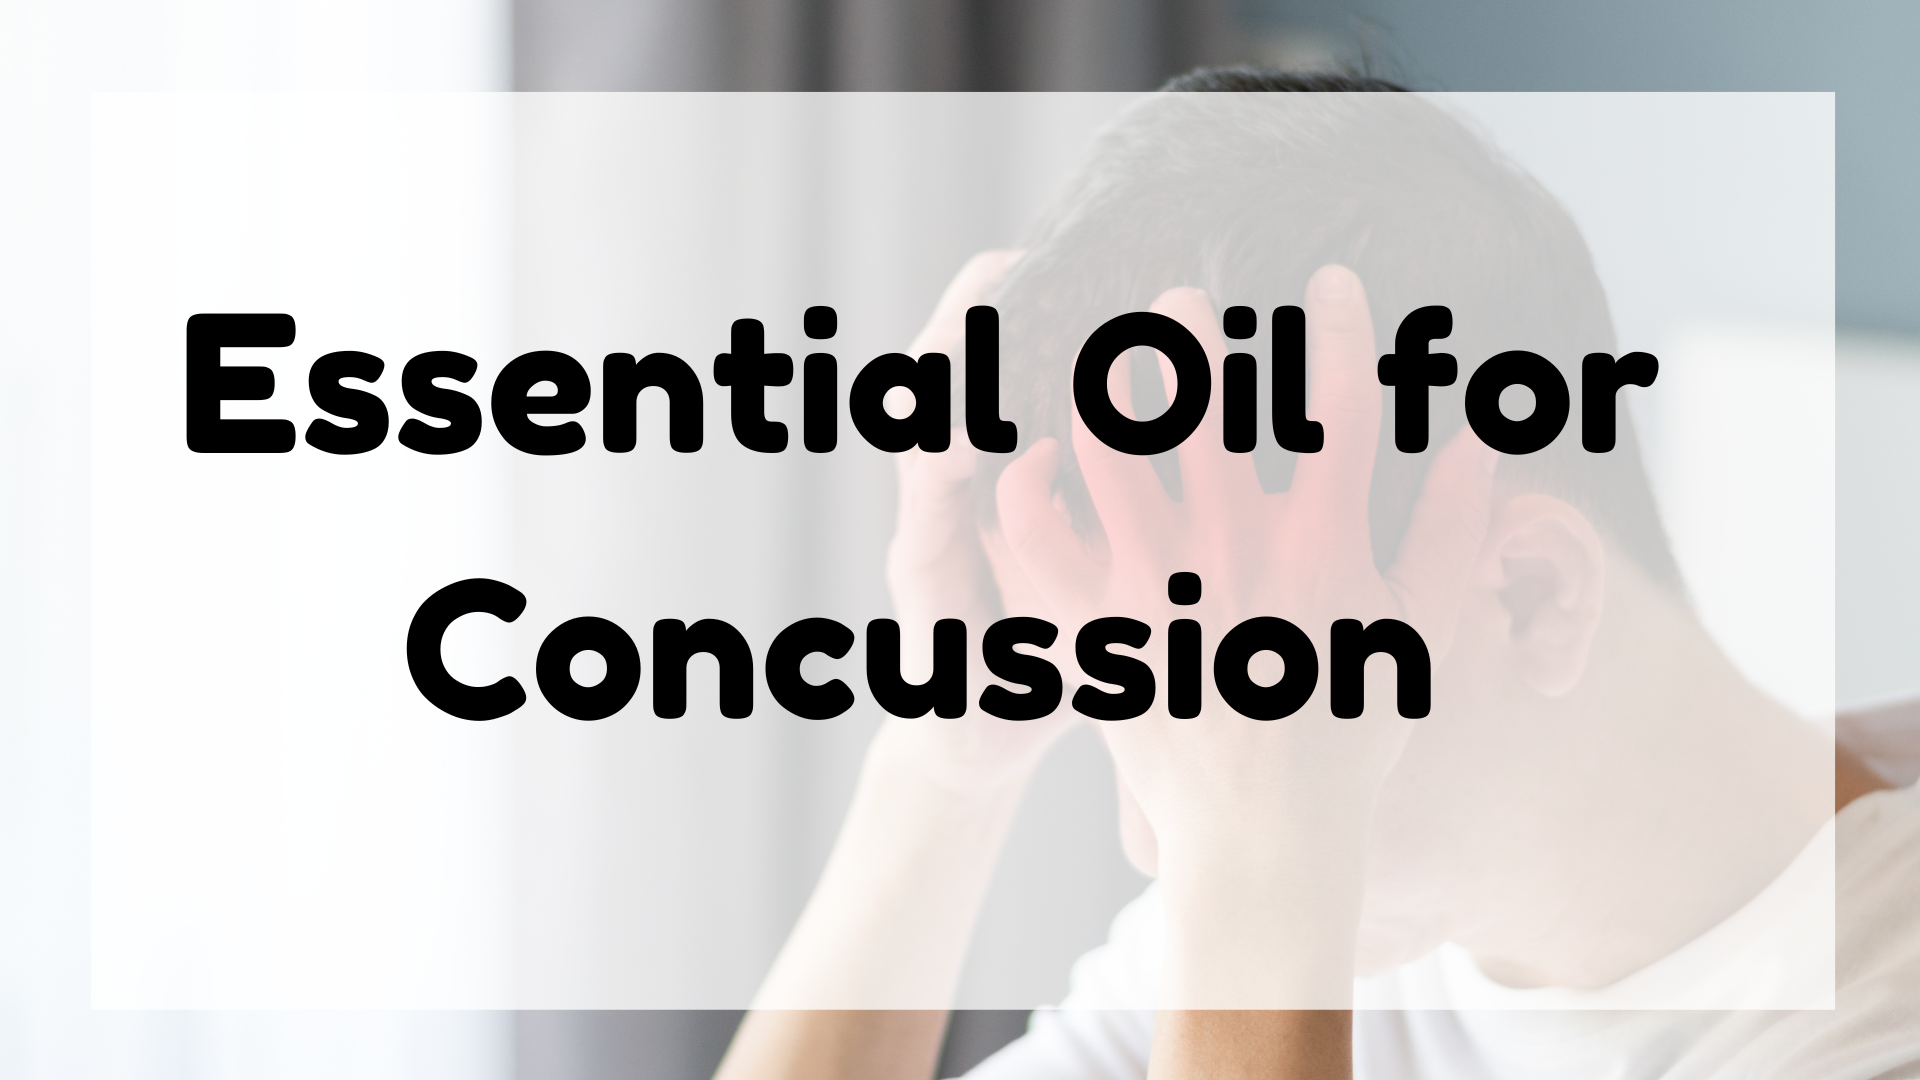 Essential Oil for Concussion featured image